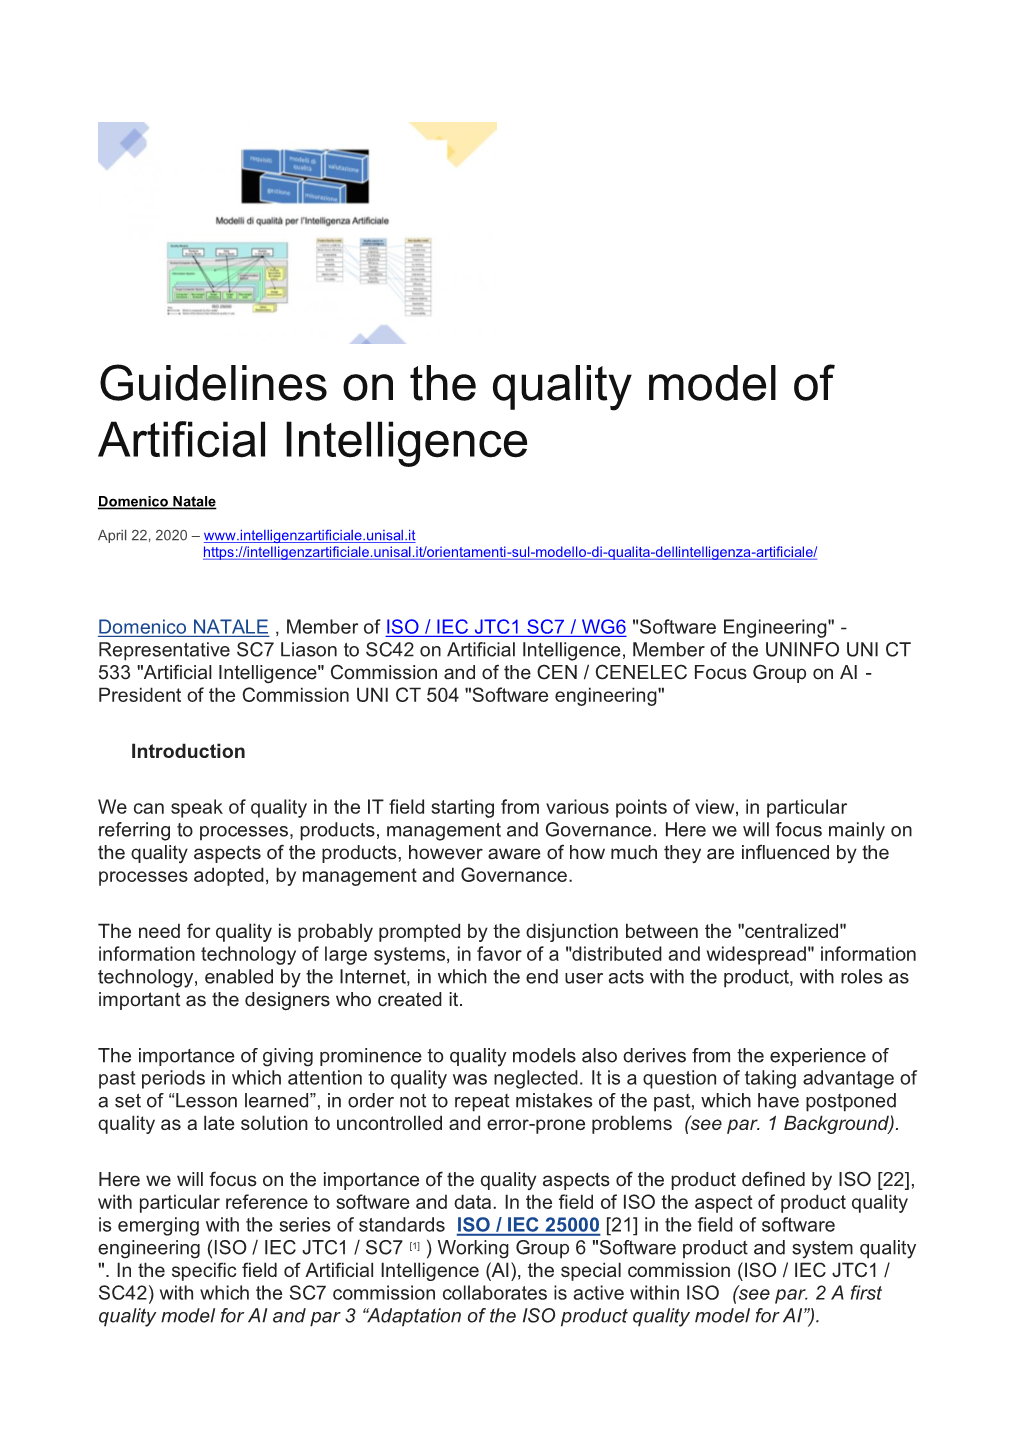 Guidelines on the Quality Model of Artificial Intelligence